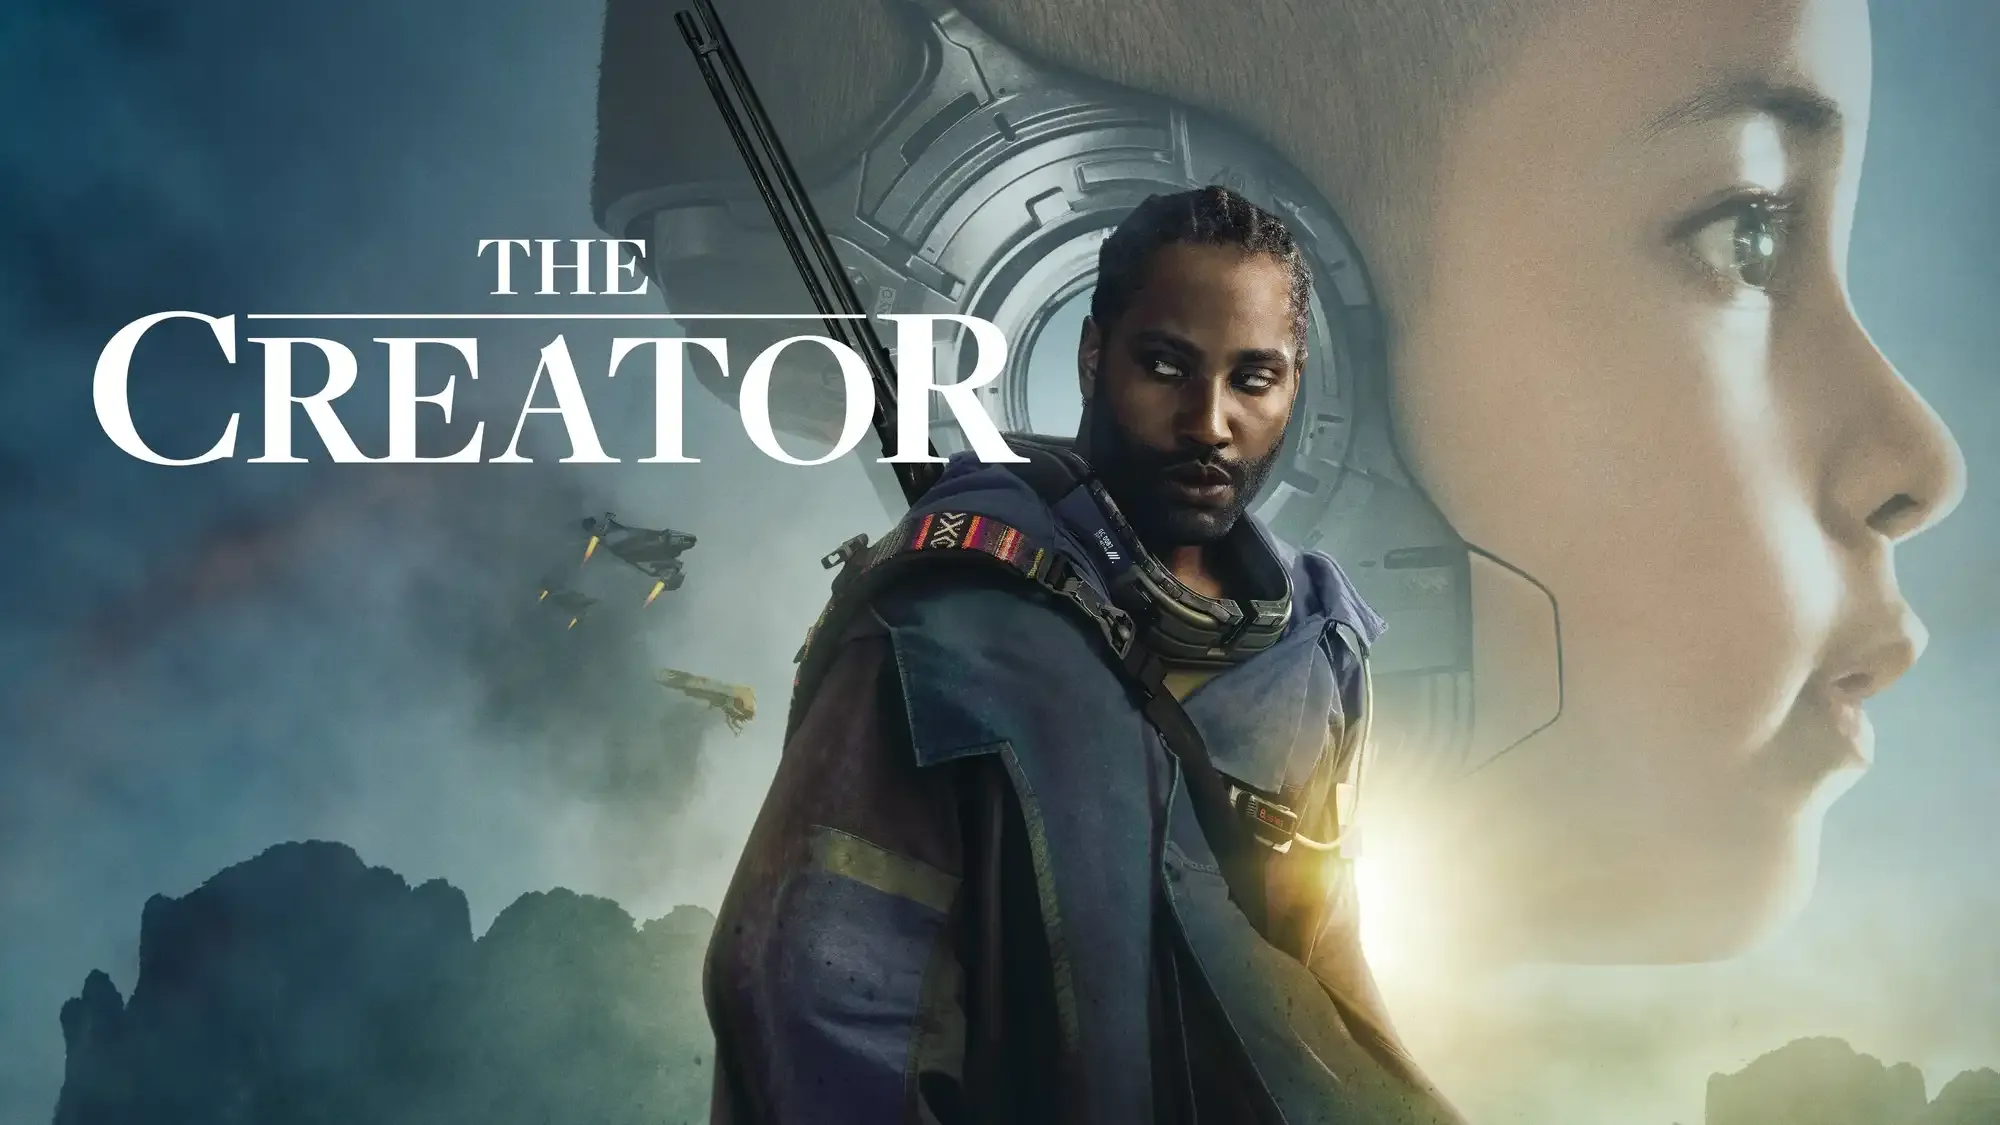 The Creator movie review